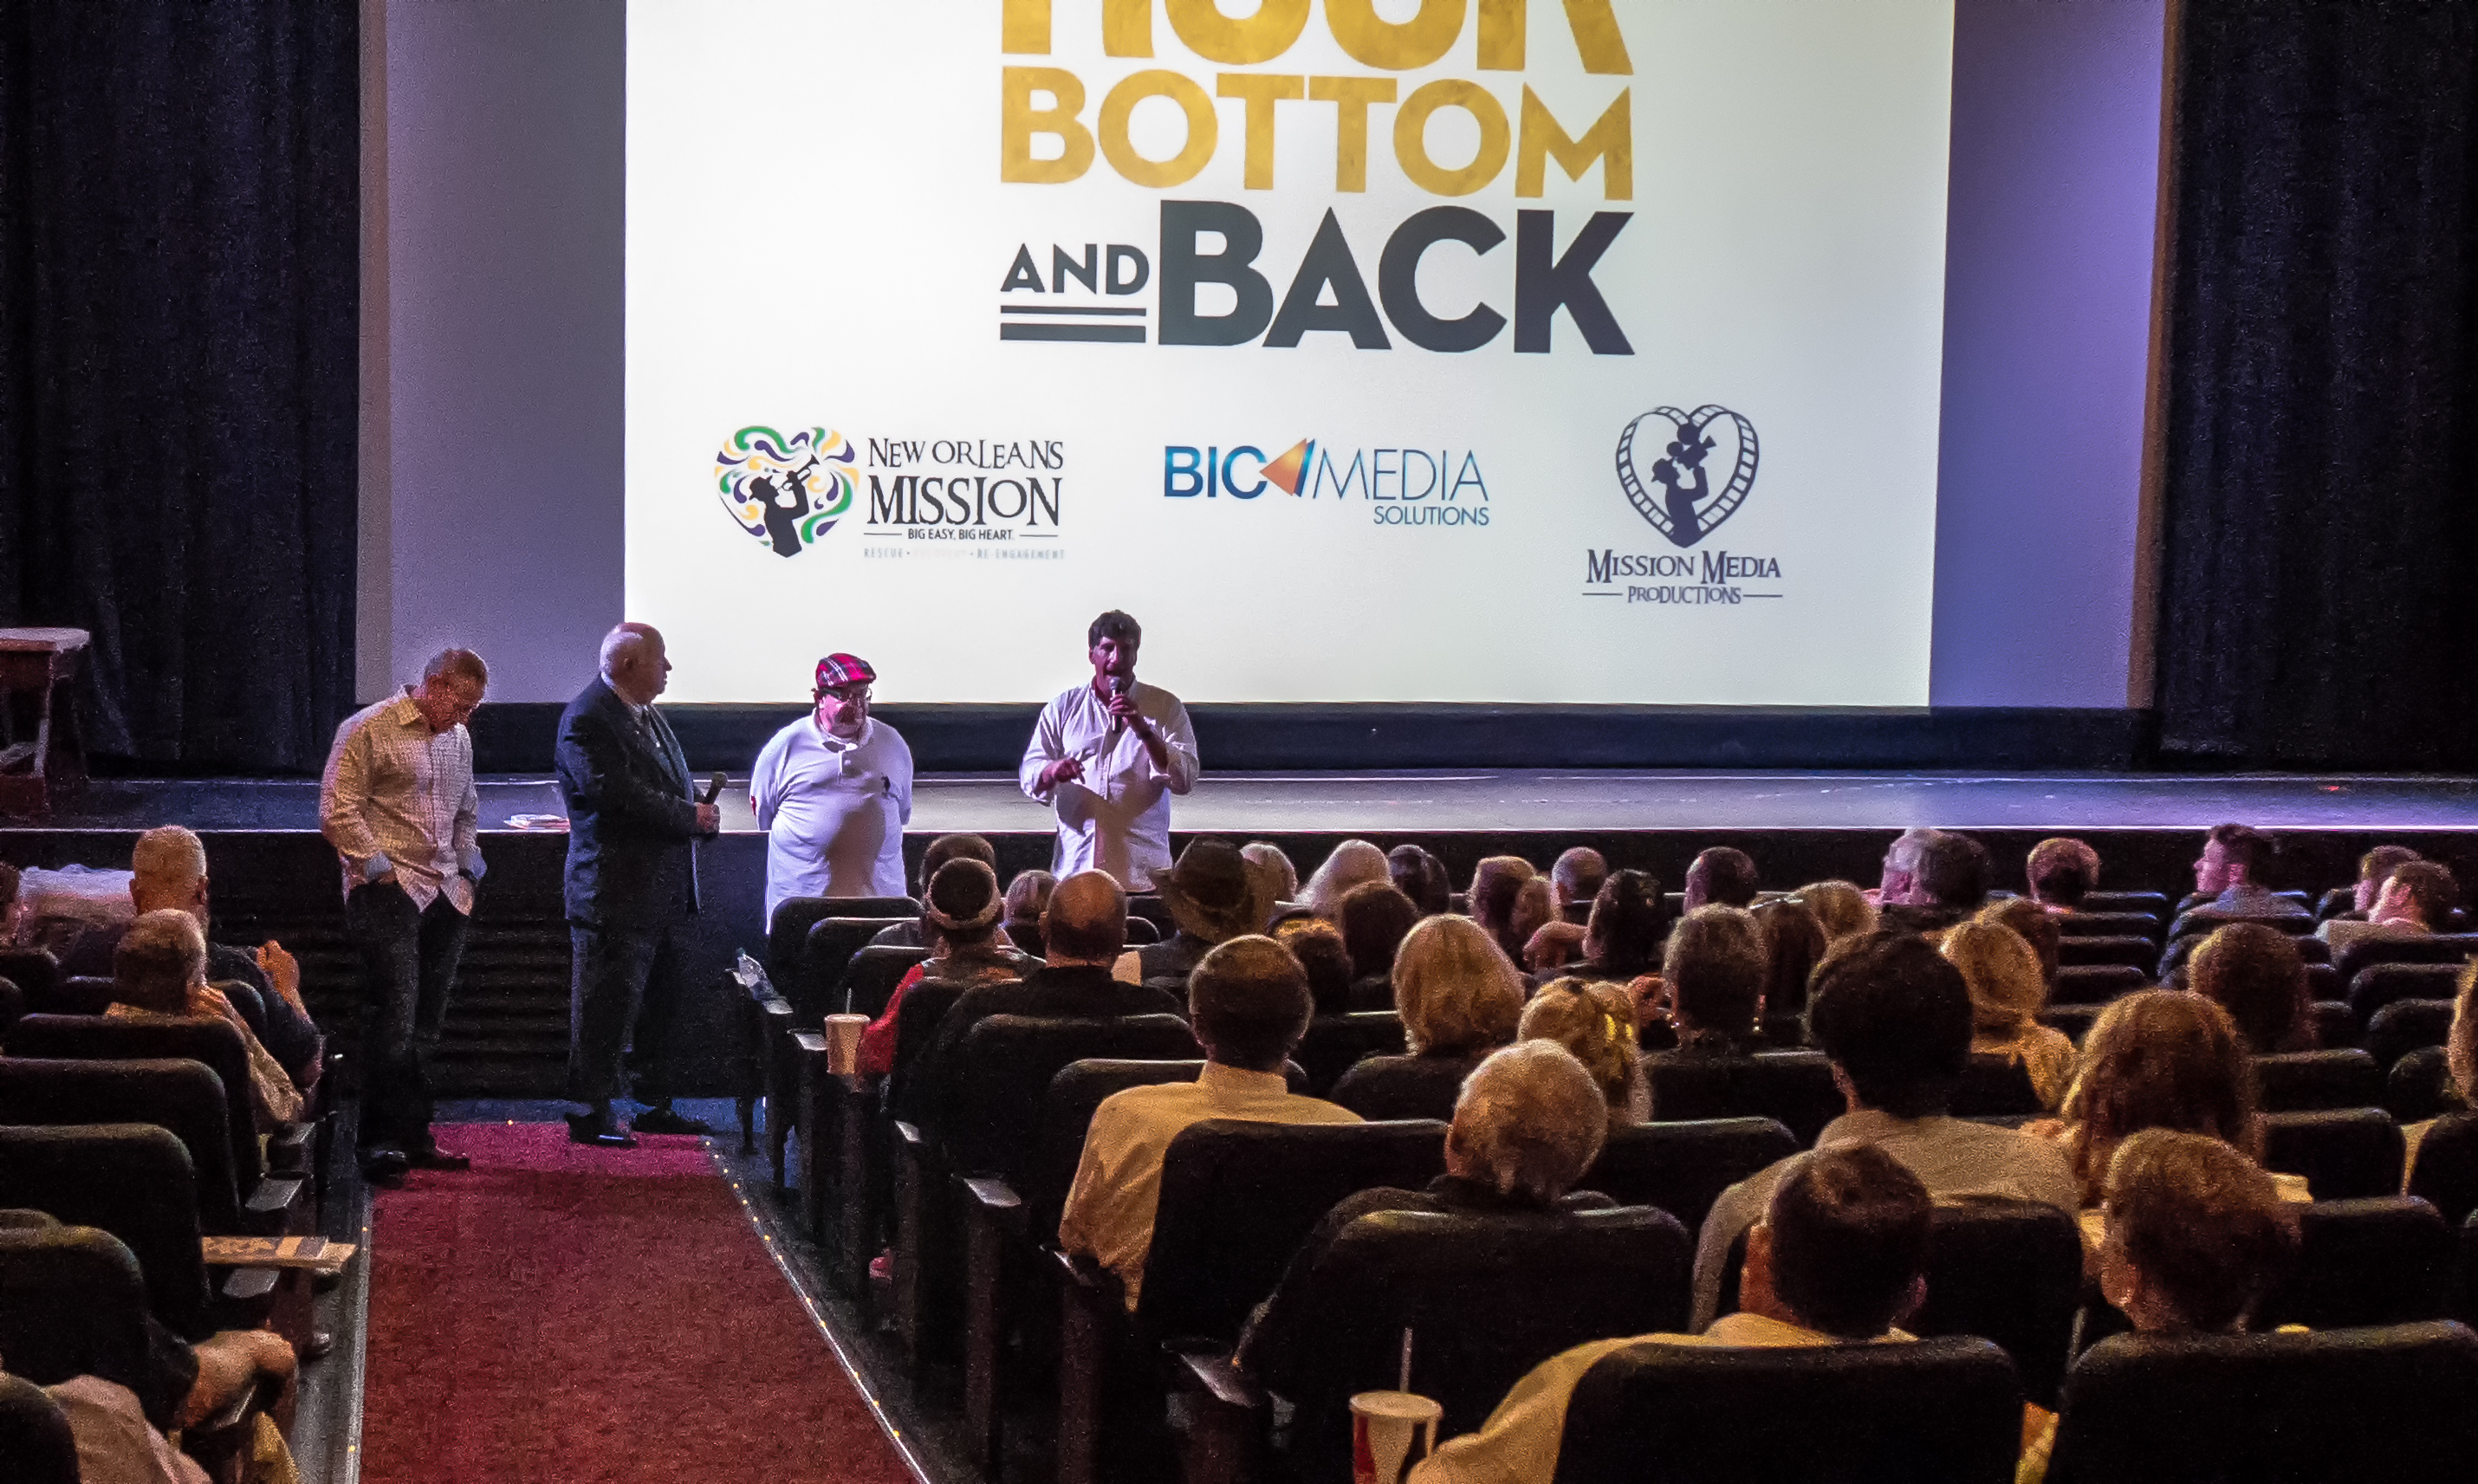 Rock Bottom and Back world premiere - Prytania Theatre New Orleans